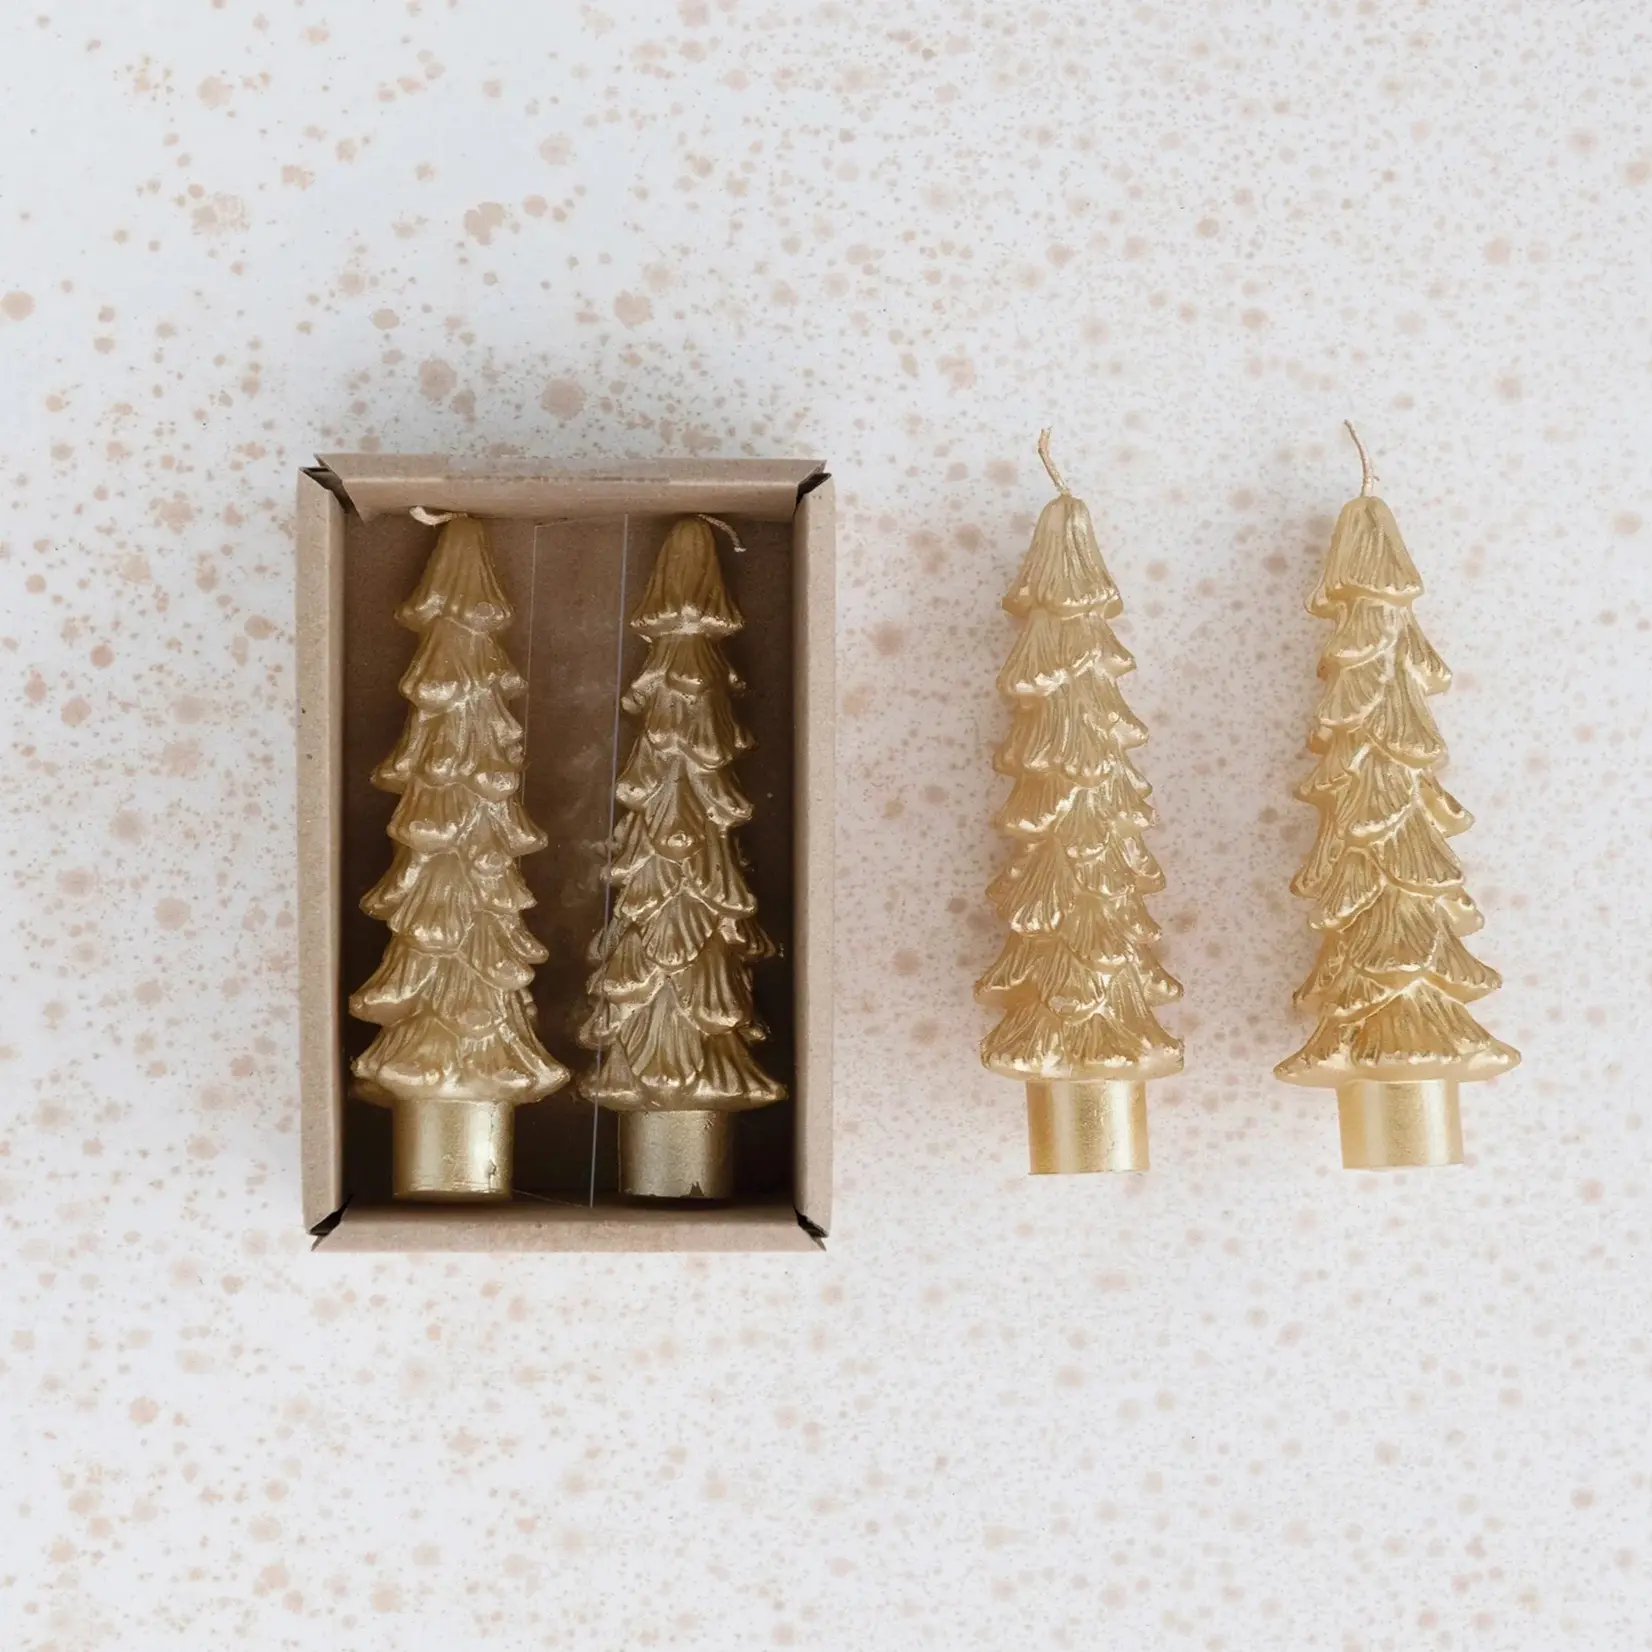 5" Unscented Gold Tree Shaped Taper Candles, Set of 2